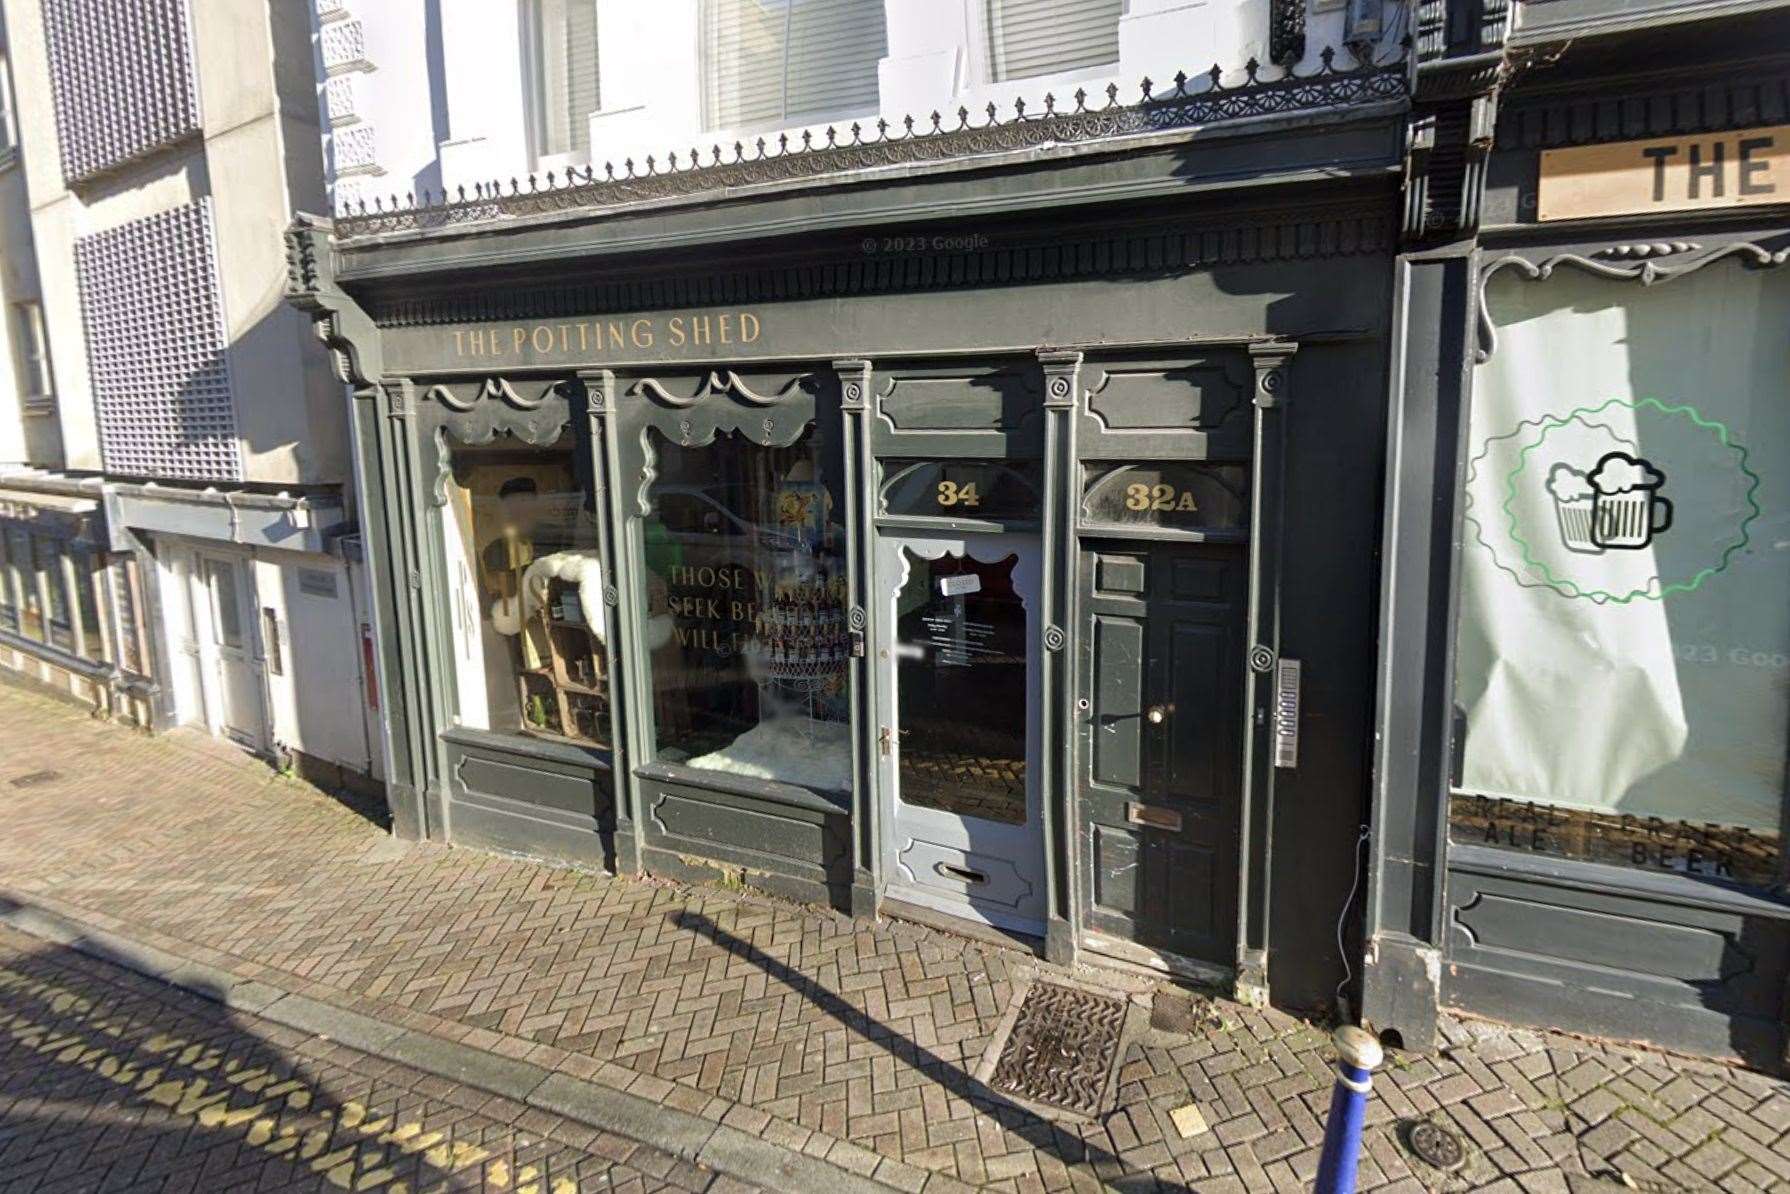 The Potting Shed in Folkestone is more than it seems at first glance. Picture: Google